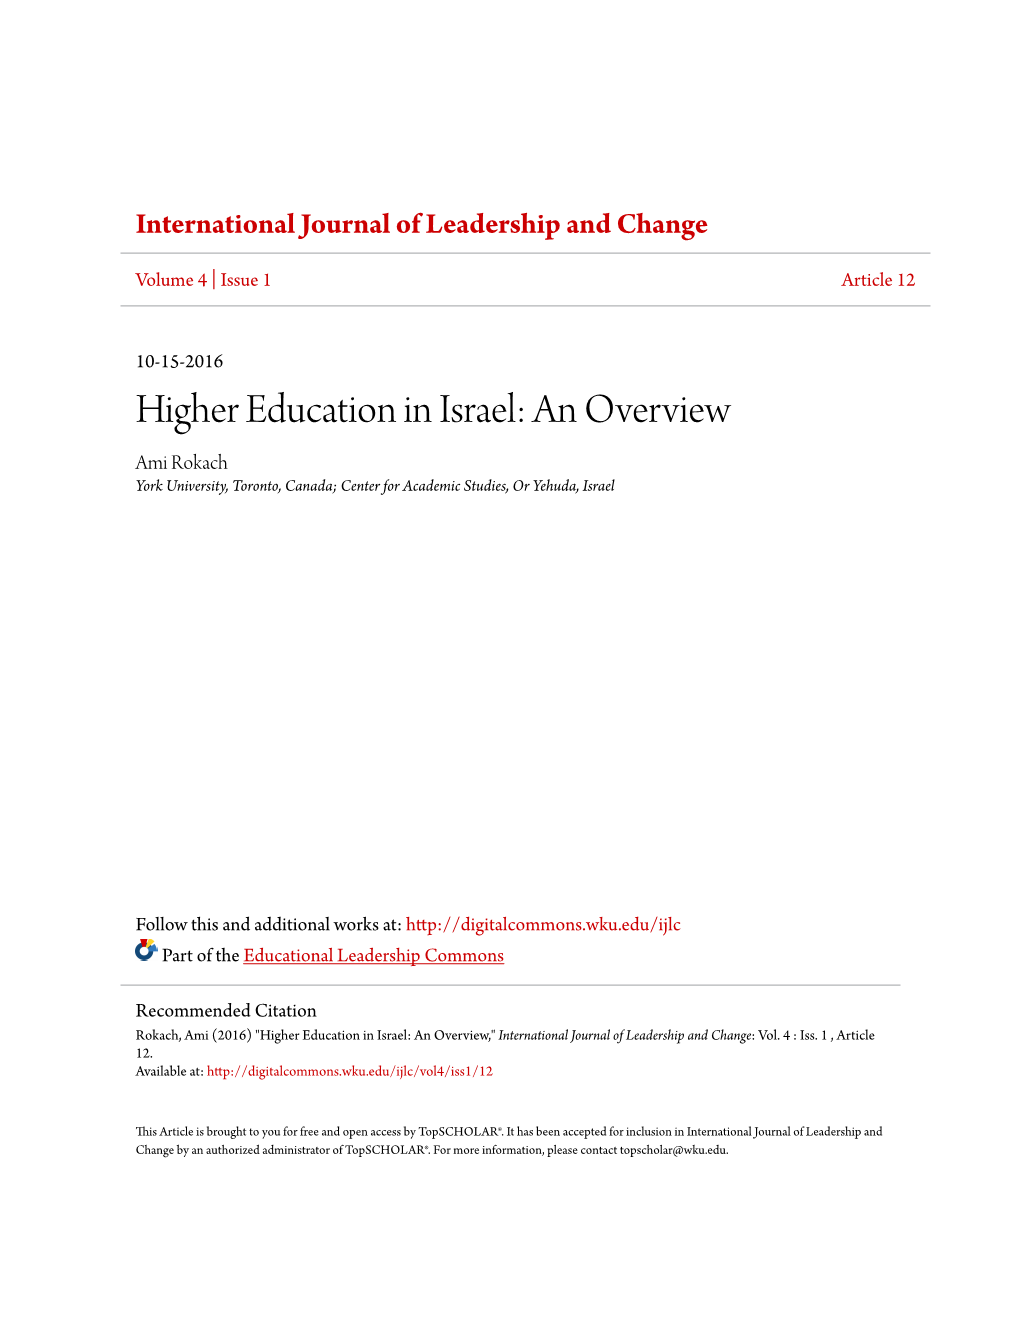 Higher Education in Israel: an Overview Ami Rokach York University, Toronto, Canada; Center for Academic Studies, Or Yehuda, Israel